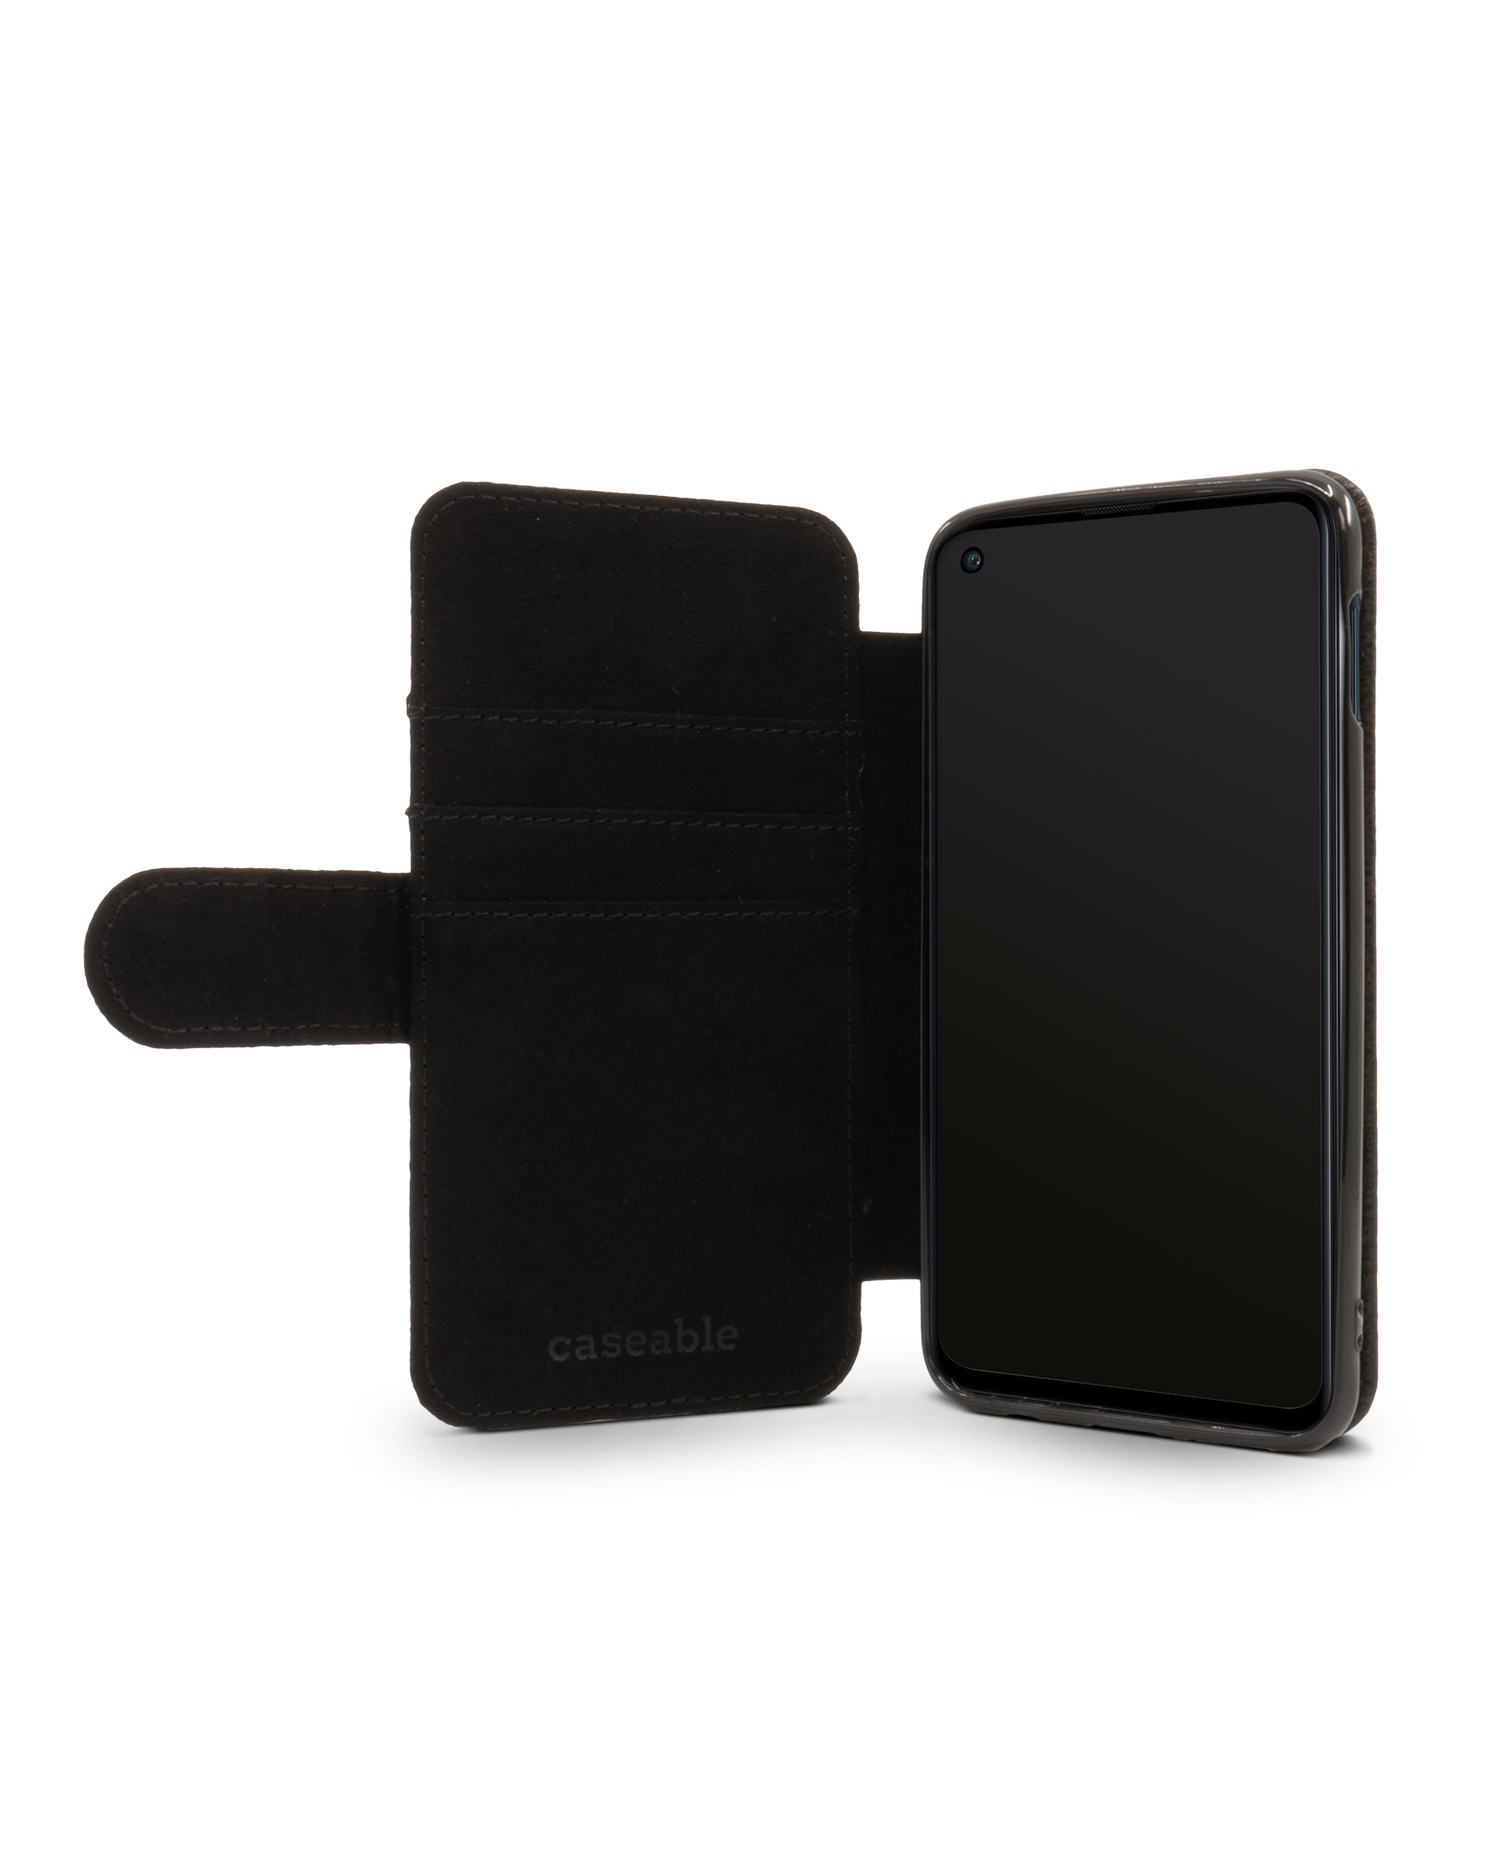 Carbon II Wallet Phone Case Samsung Galaxy S10e: Inside View